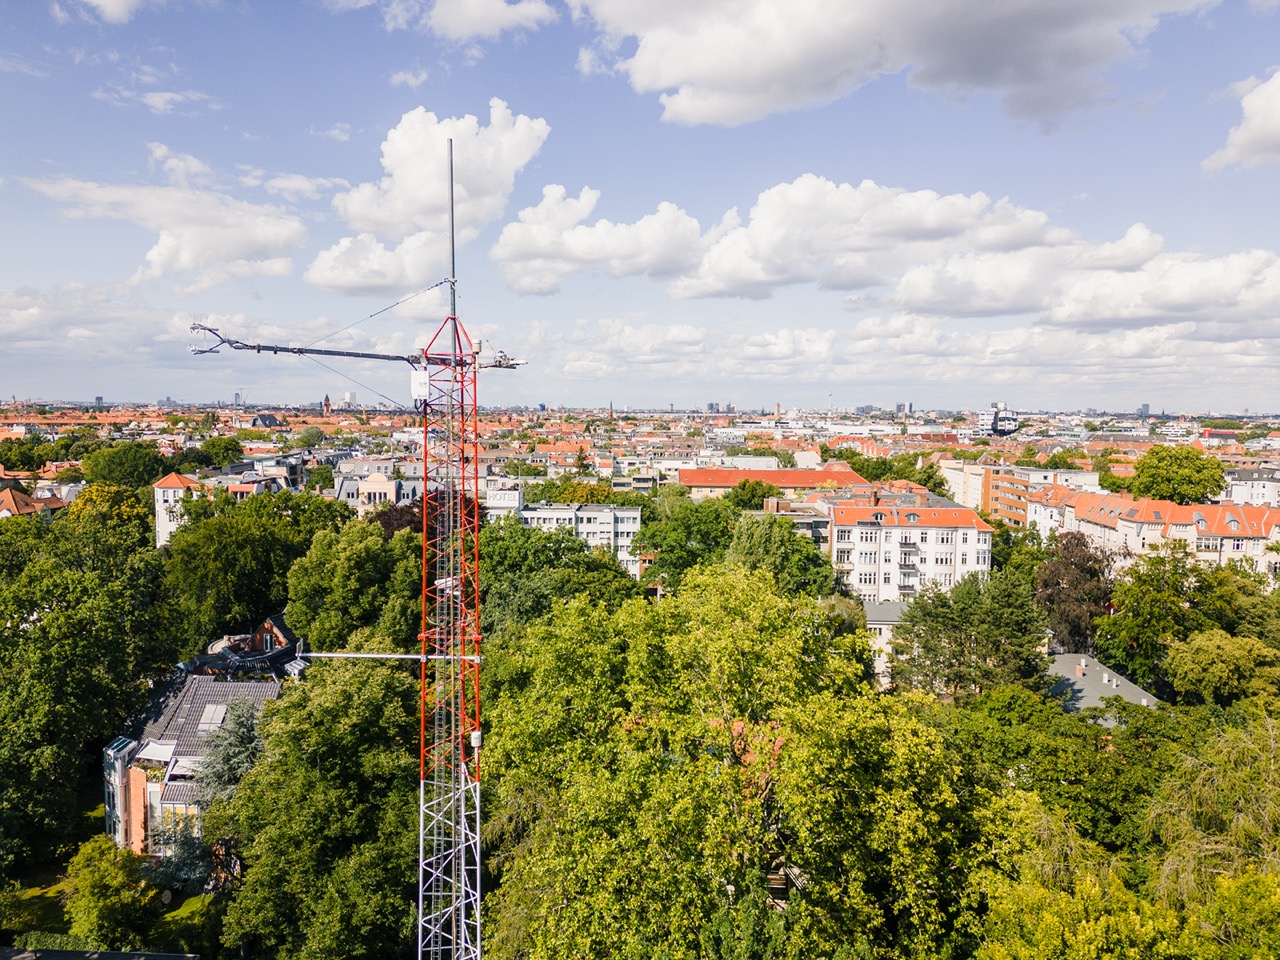 Picture of the measurement tower reaching over the trees with a city landscape on the background